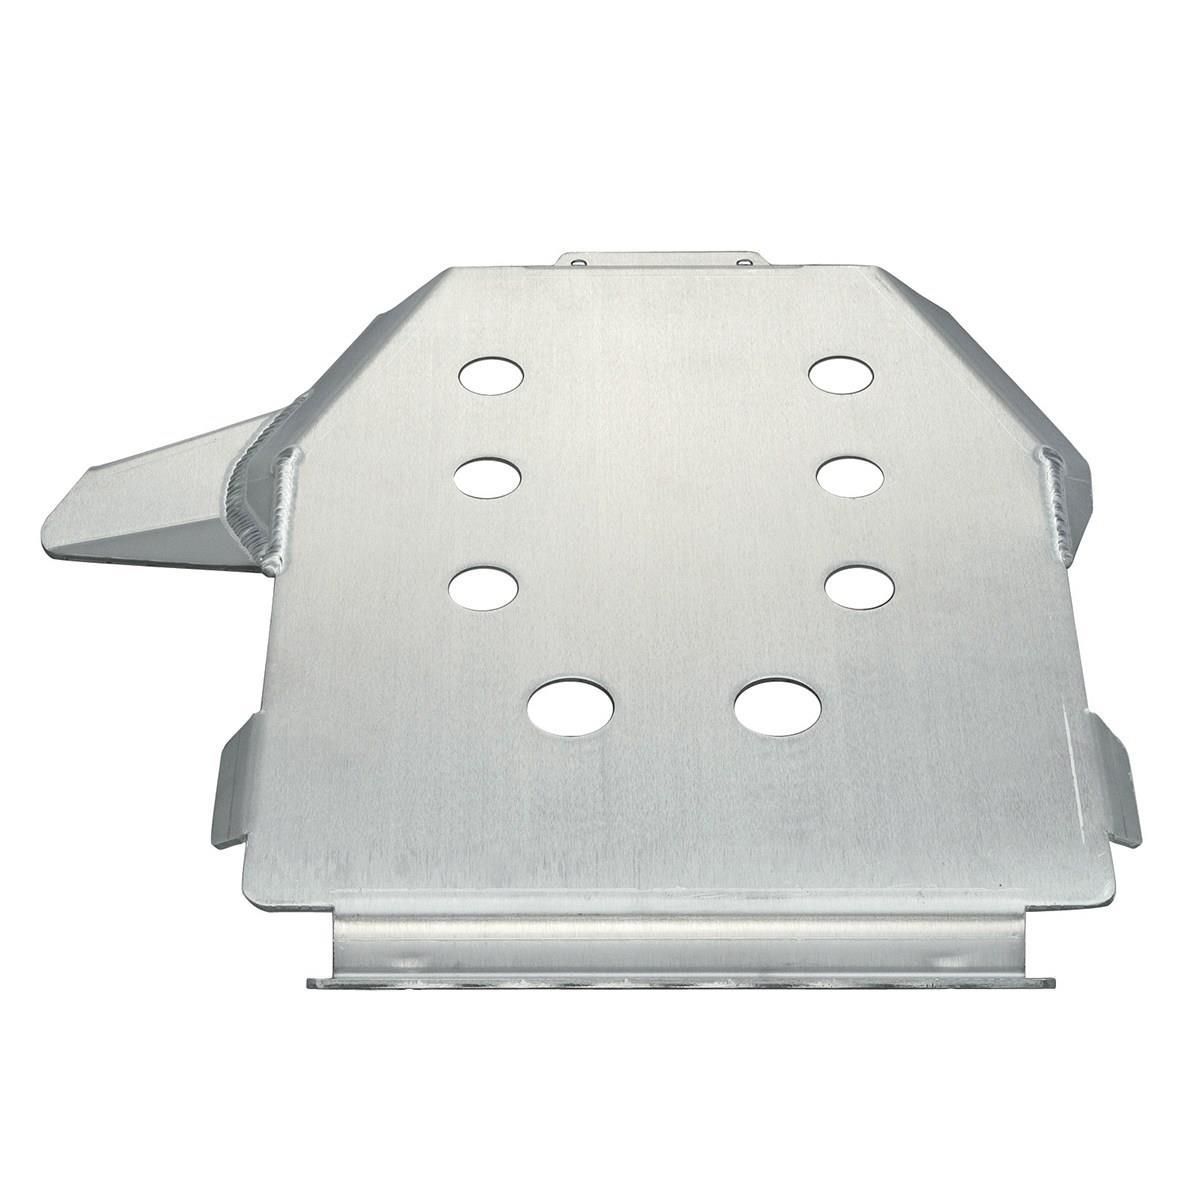 ABA-3B434-00-00 Superseded by ABA-3B434-00-10 - FRAME SKID PLATE, GR